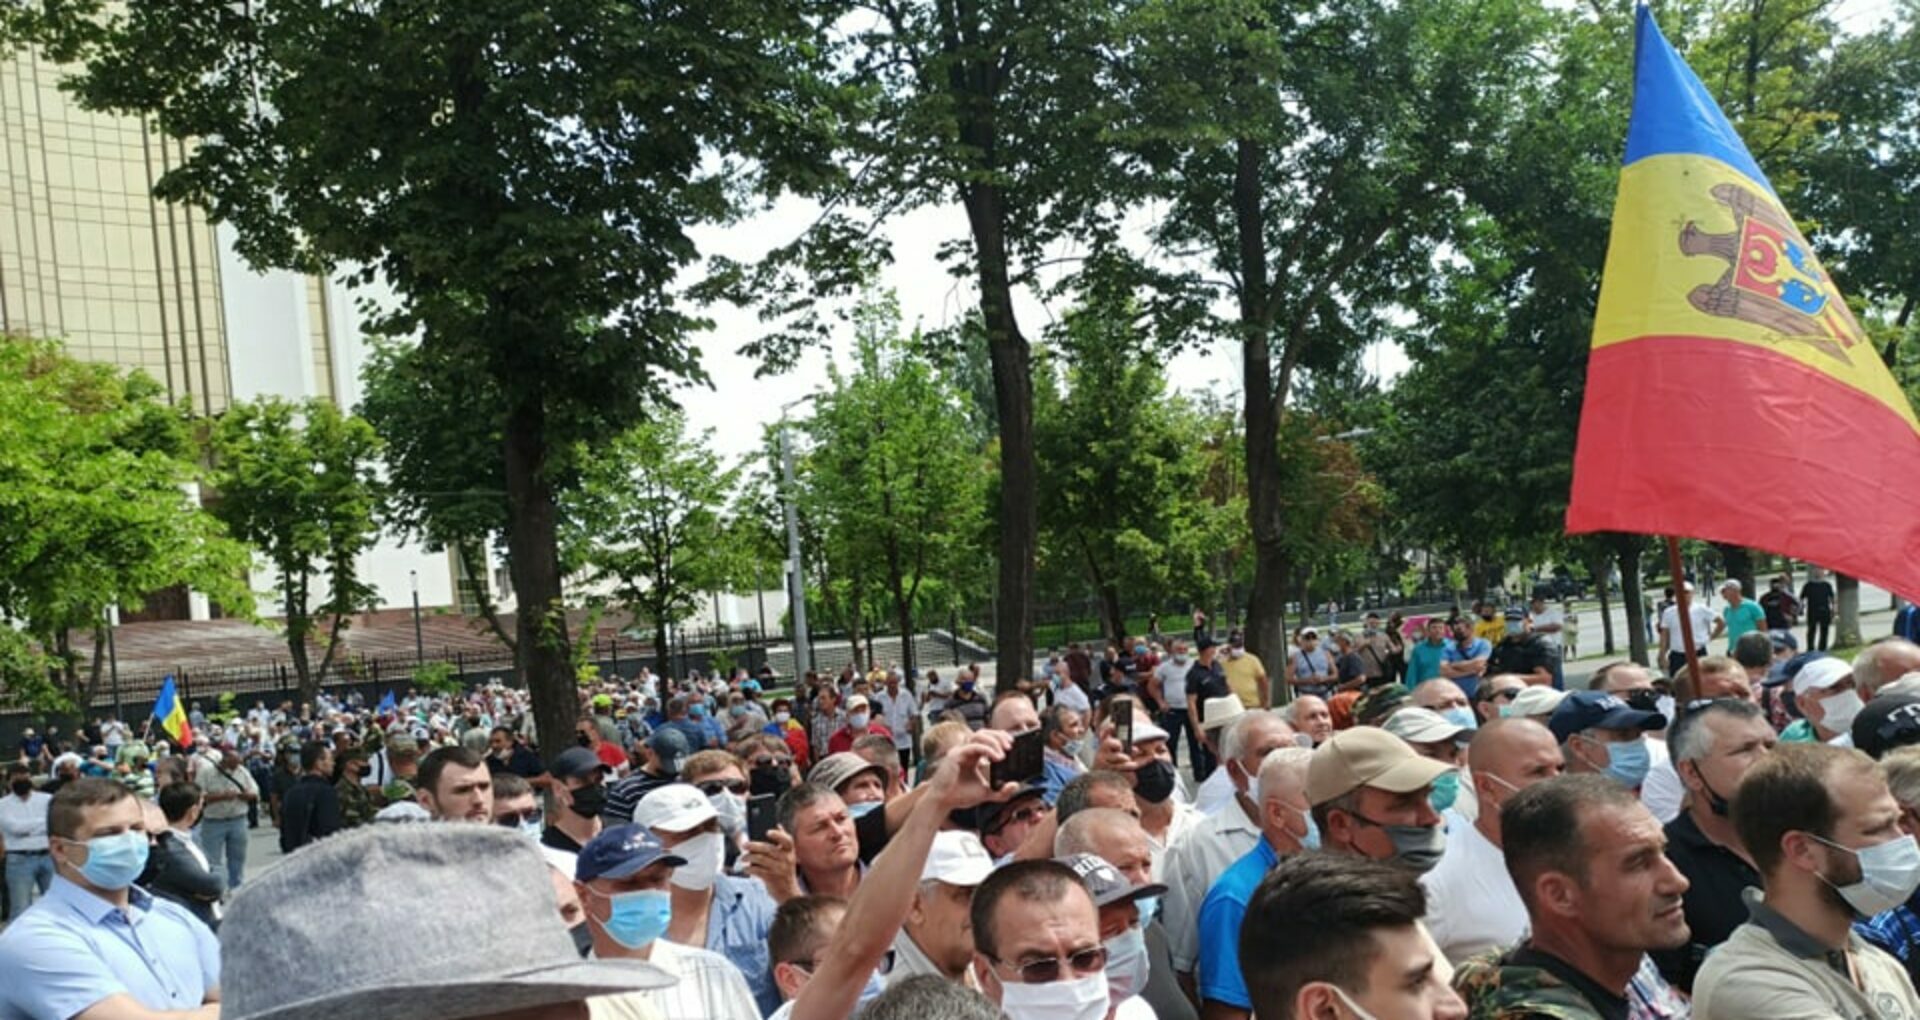 VIDEO/ Police Clashes with Protesters in Chișinău